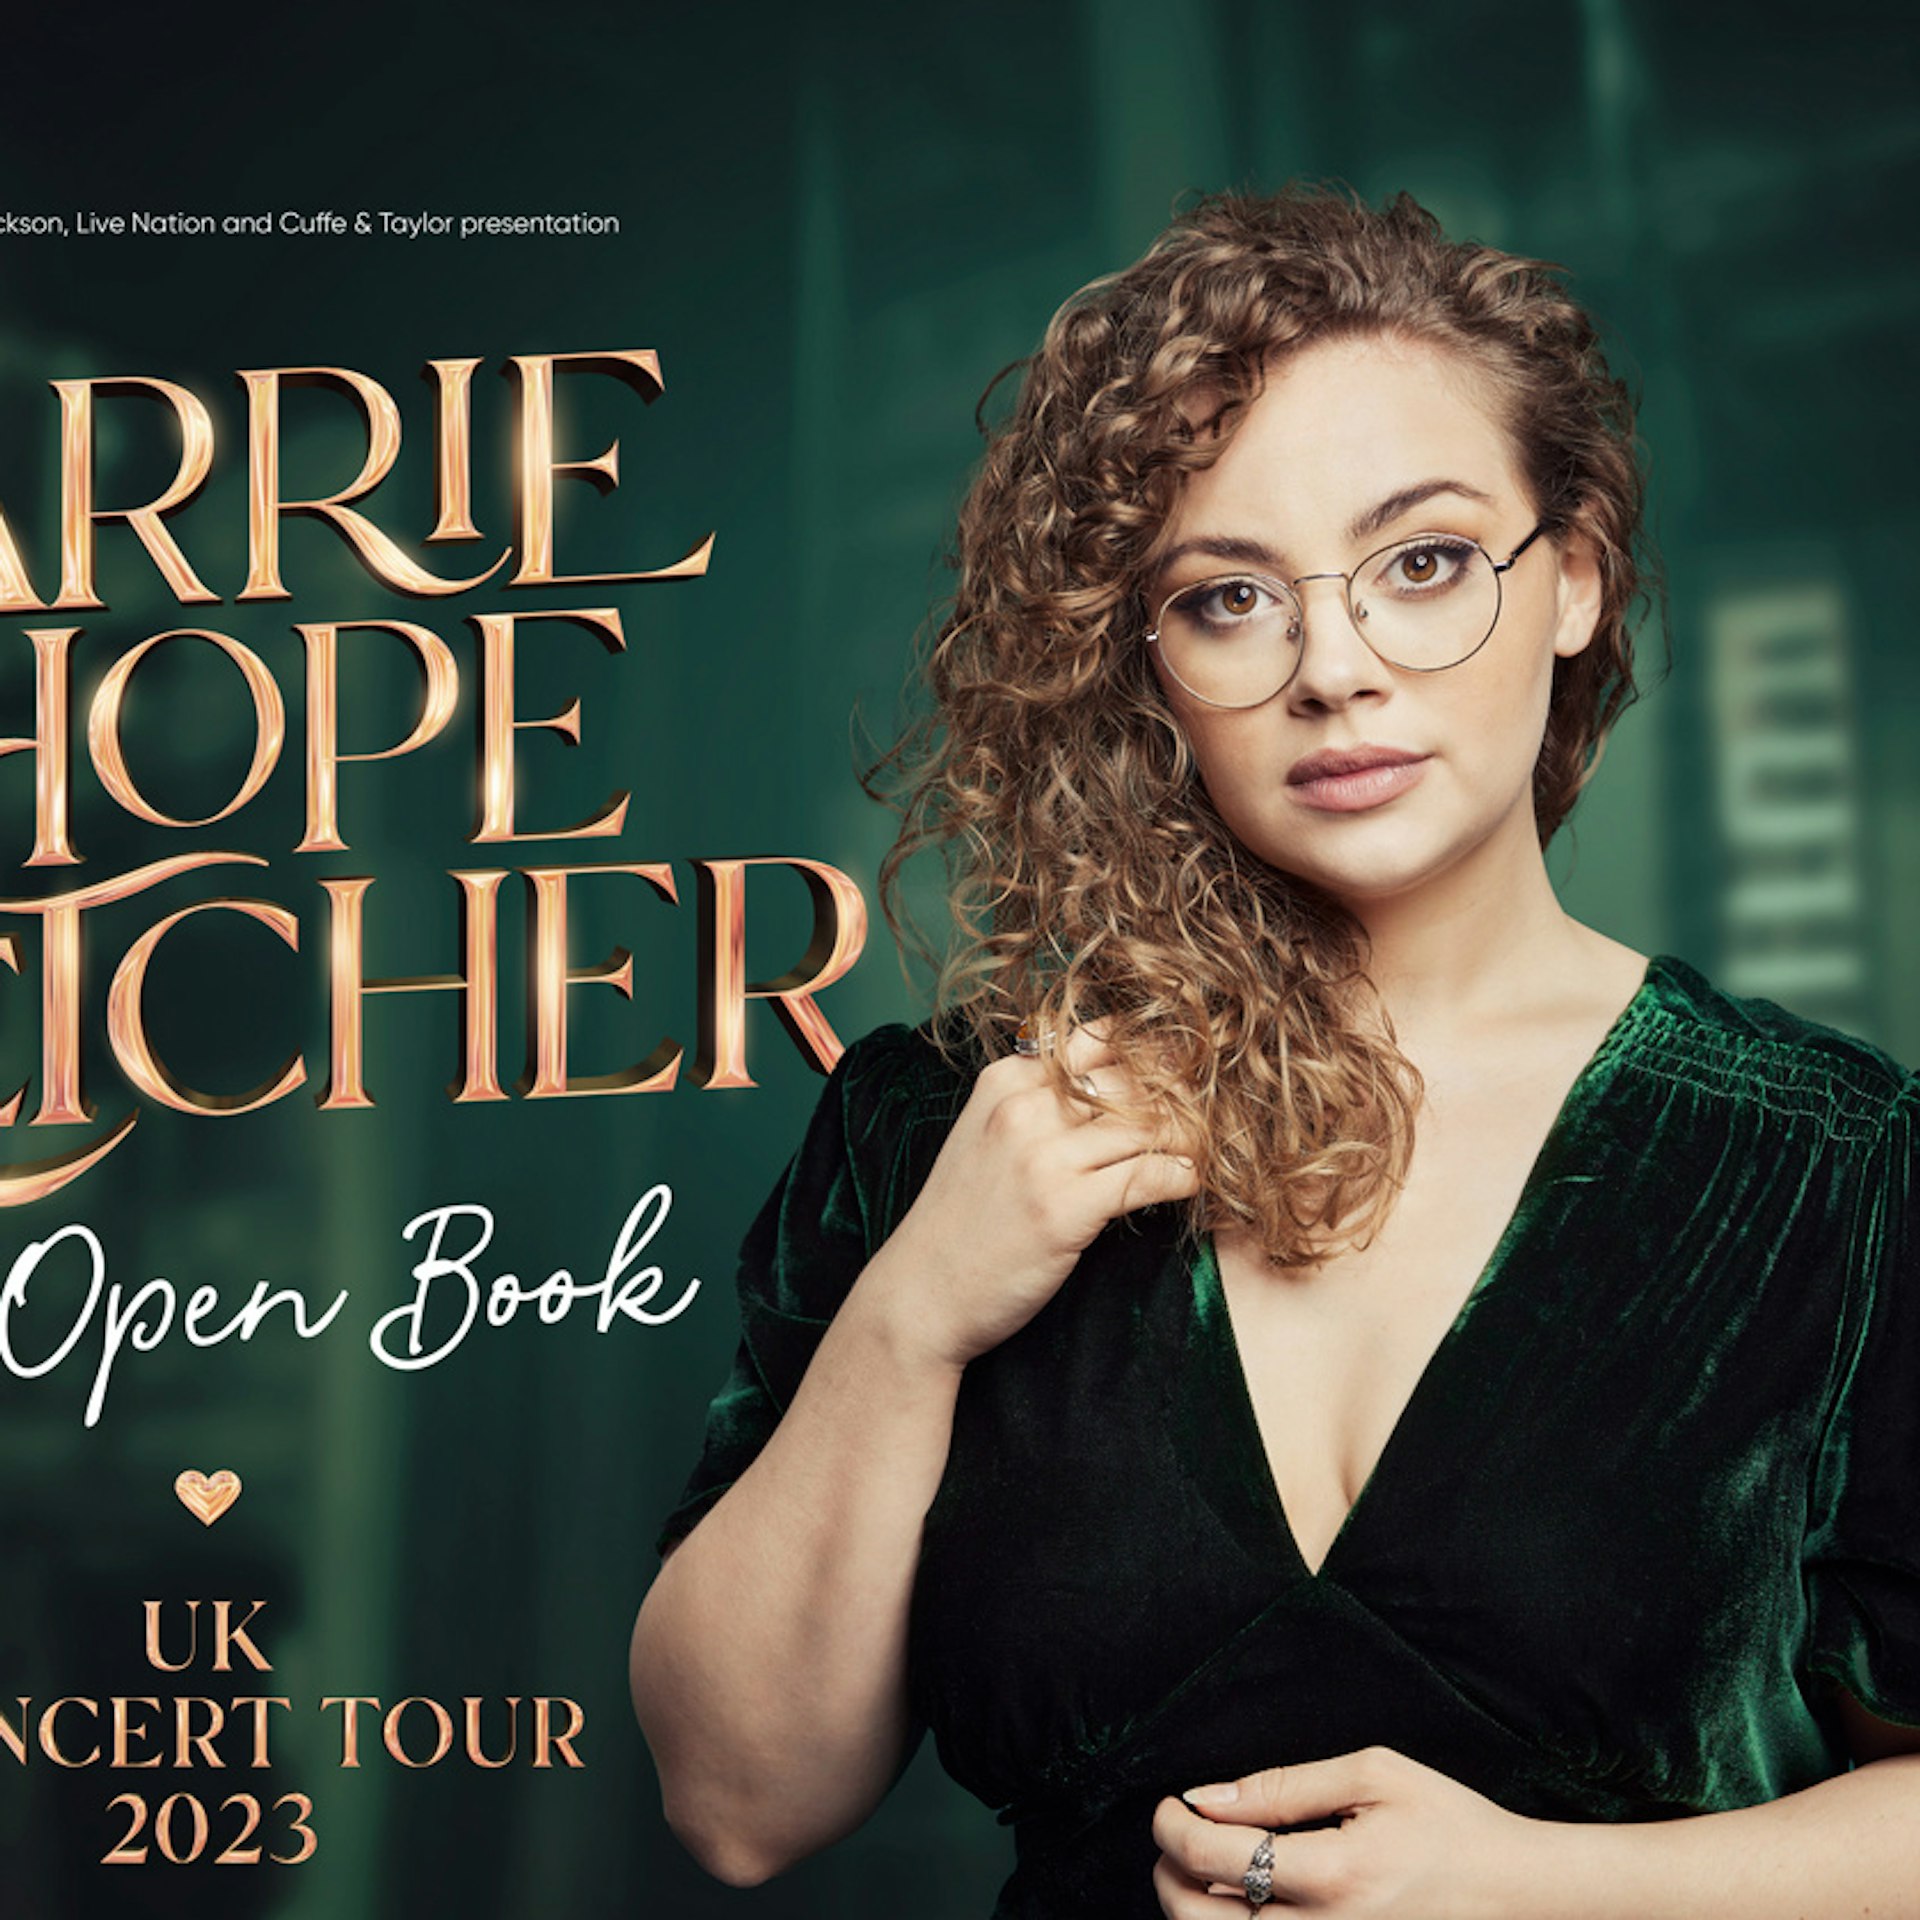 Carrie Hope Fletcher An Open Book Southampton Tickets At Mayflower Theatre On 21st May 23 Ents24